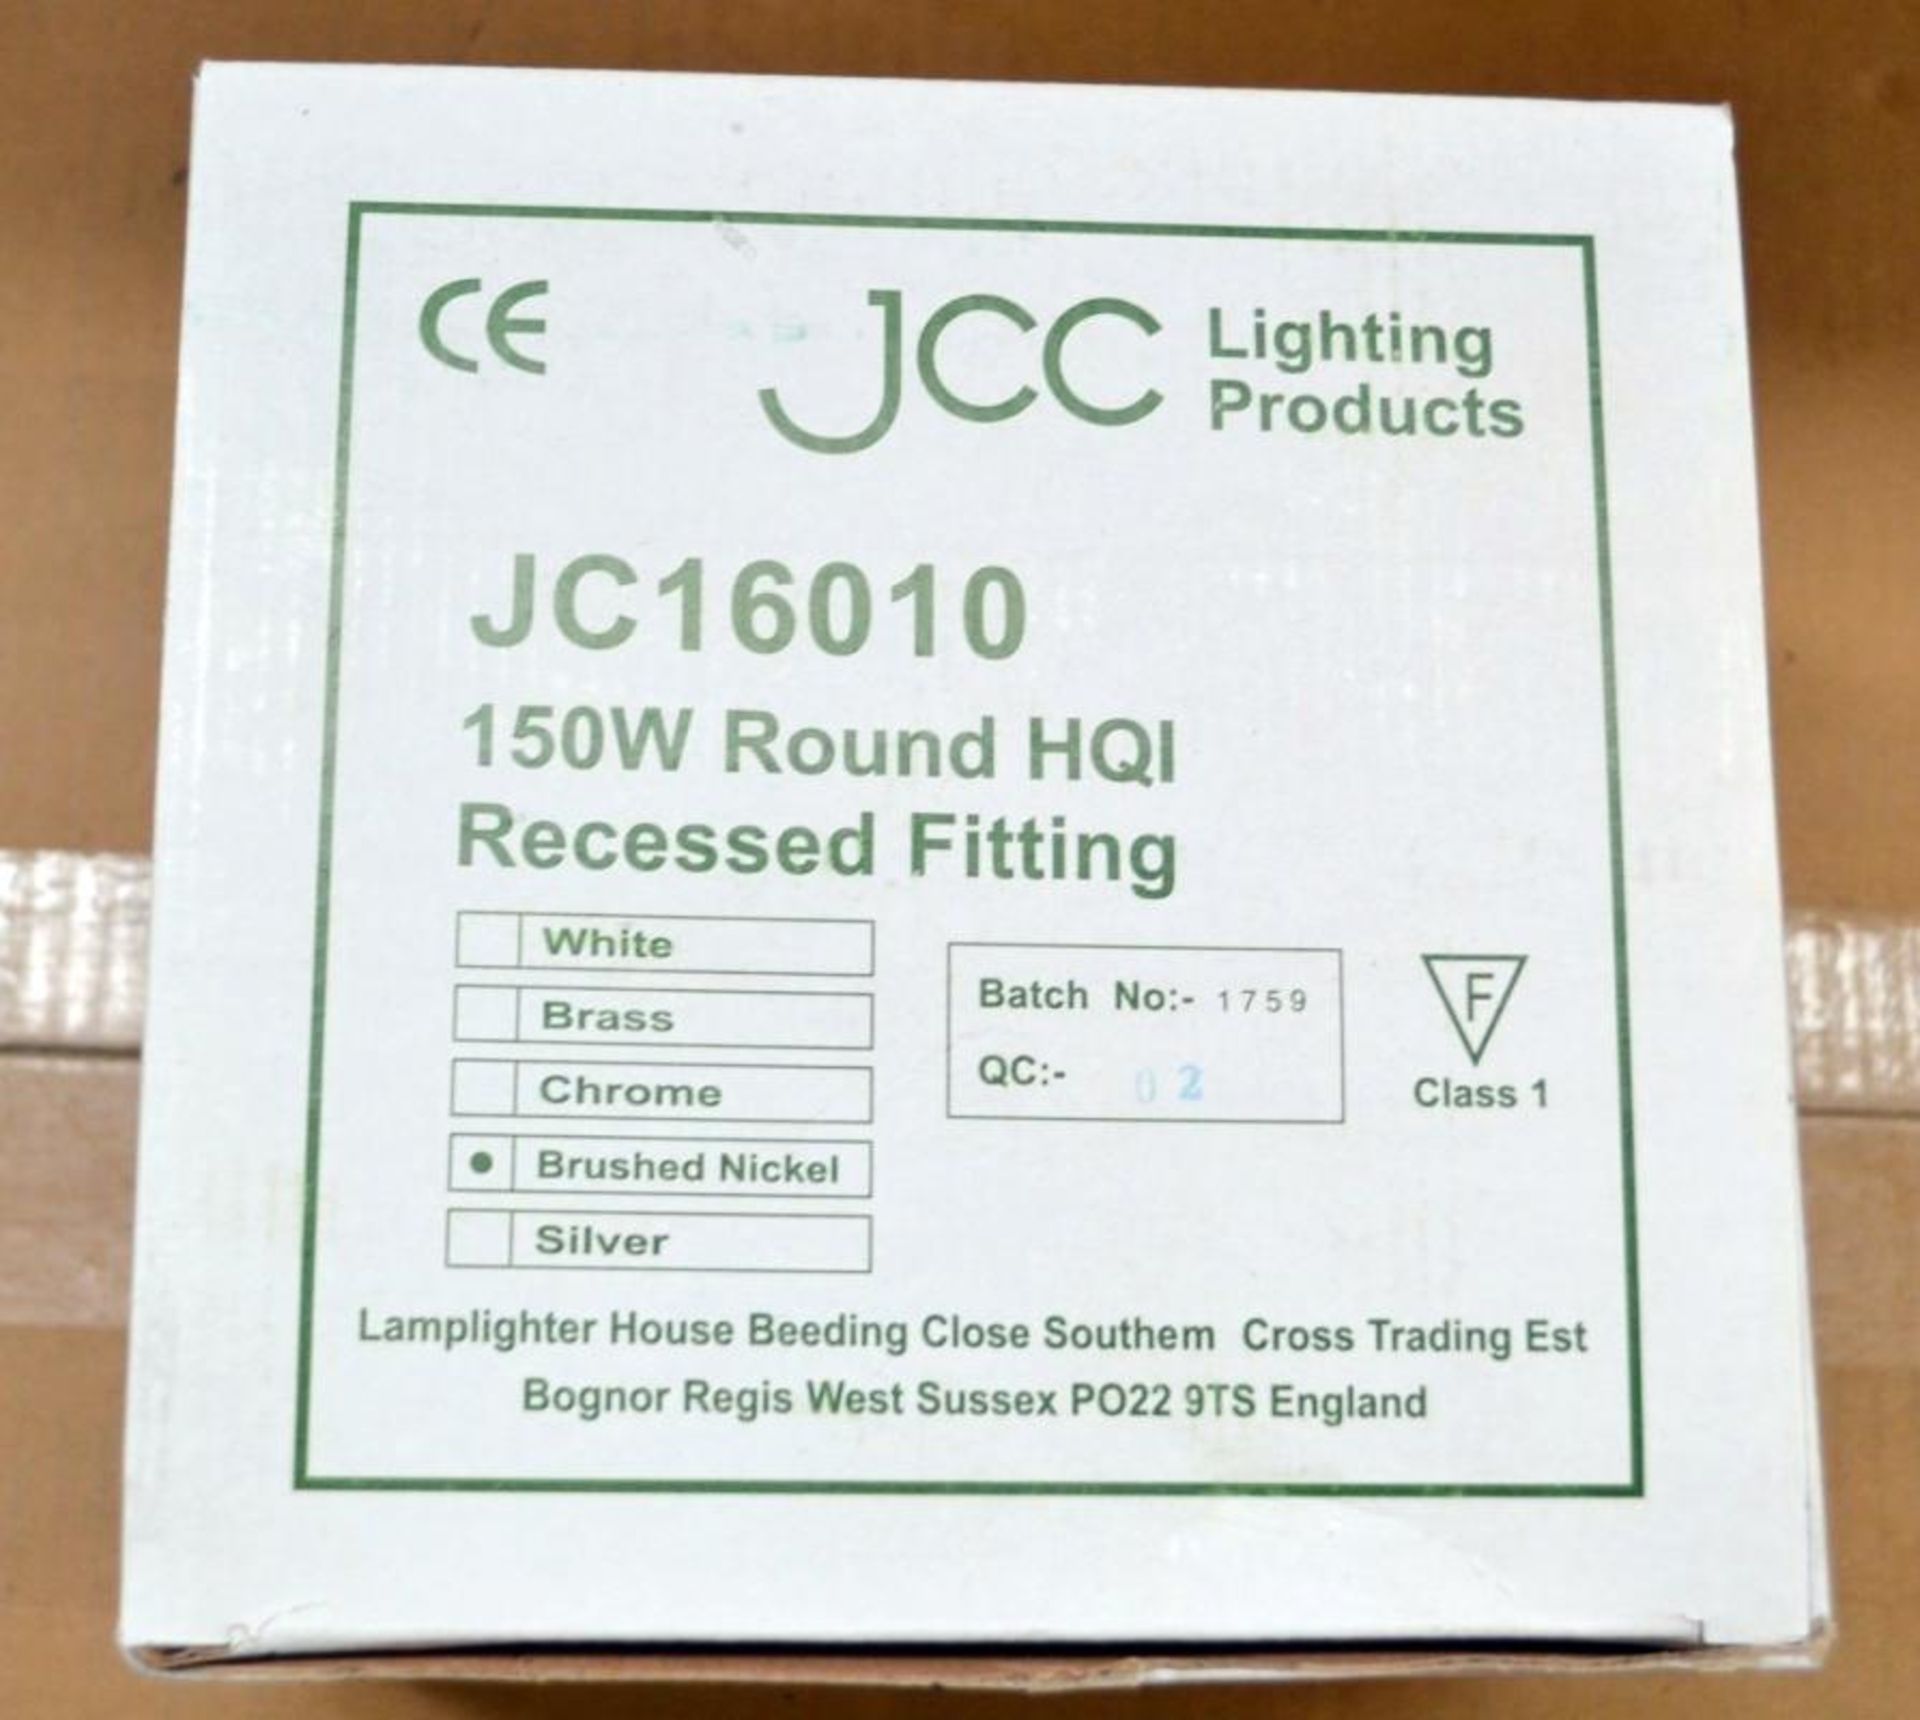 Bulk Lot of JCC Commercial Lighting - Approx 115 x Boxed Lights - New/Unused Stock - Image 3 of 31